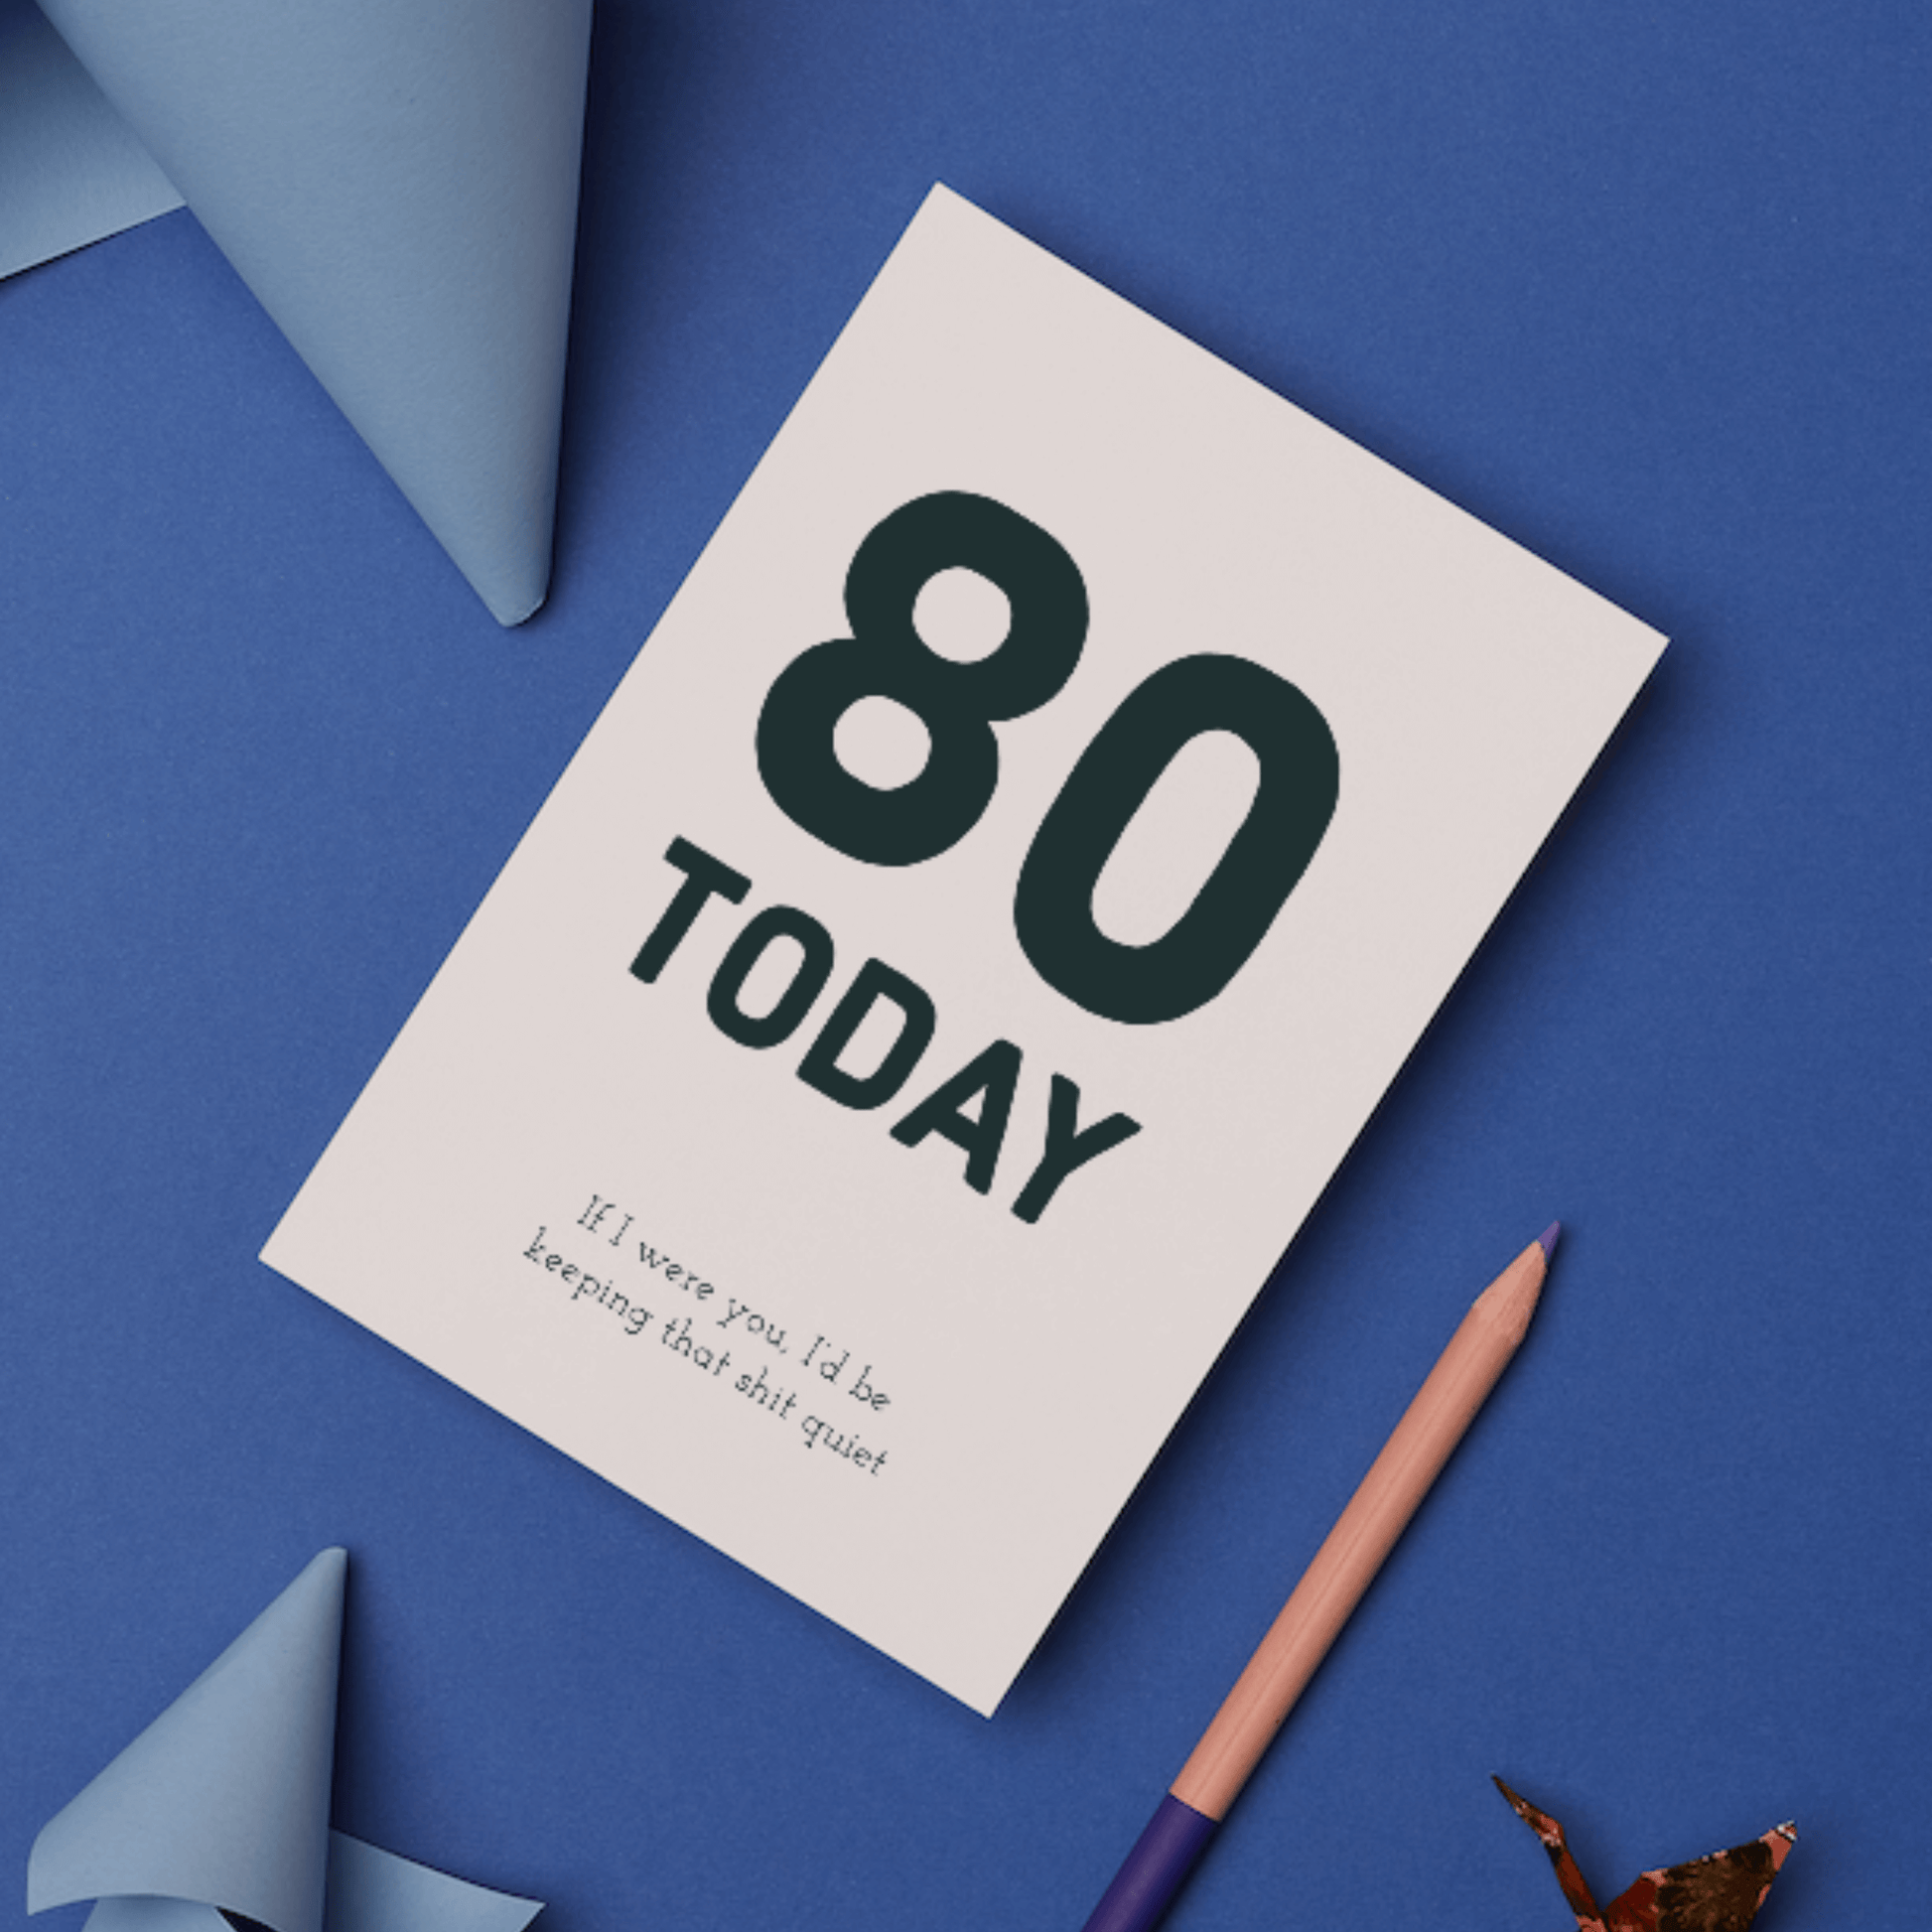 Little Kraken's 80 Today, Keep That Shit Quiet, Birthday Cards for £3.50 each